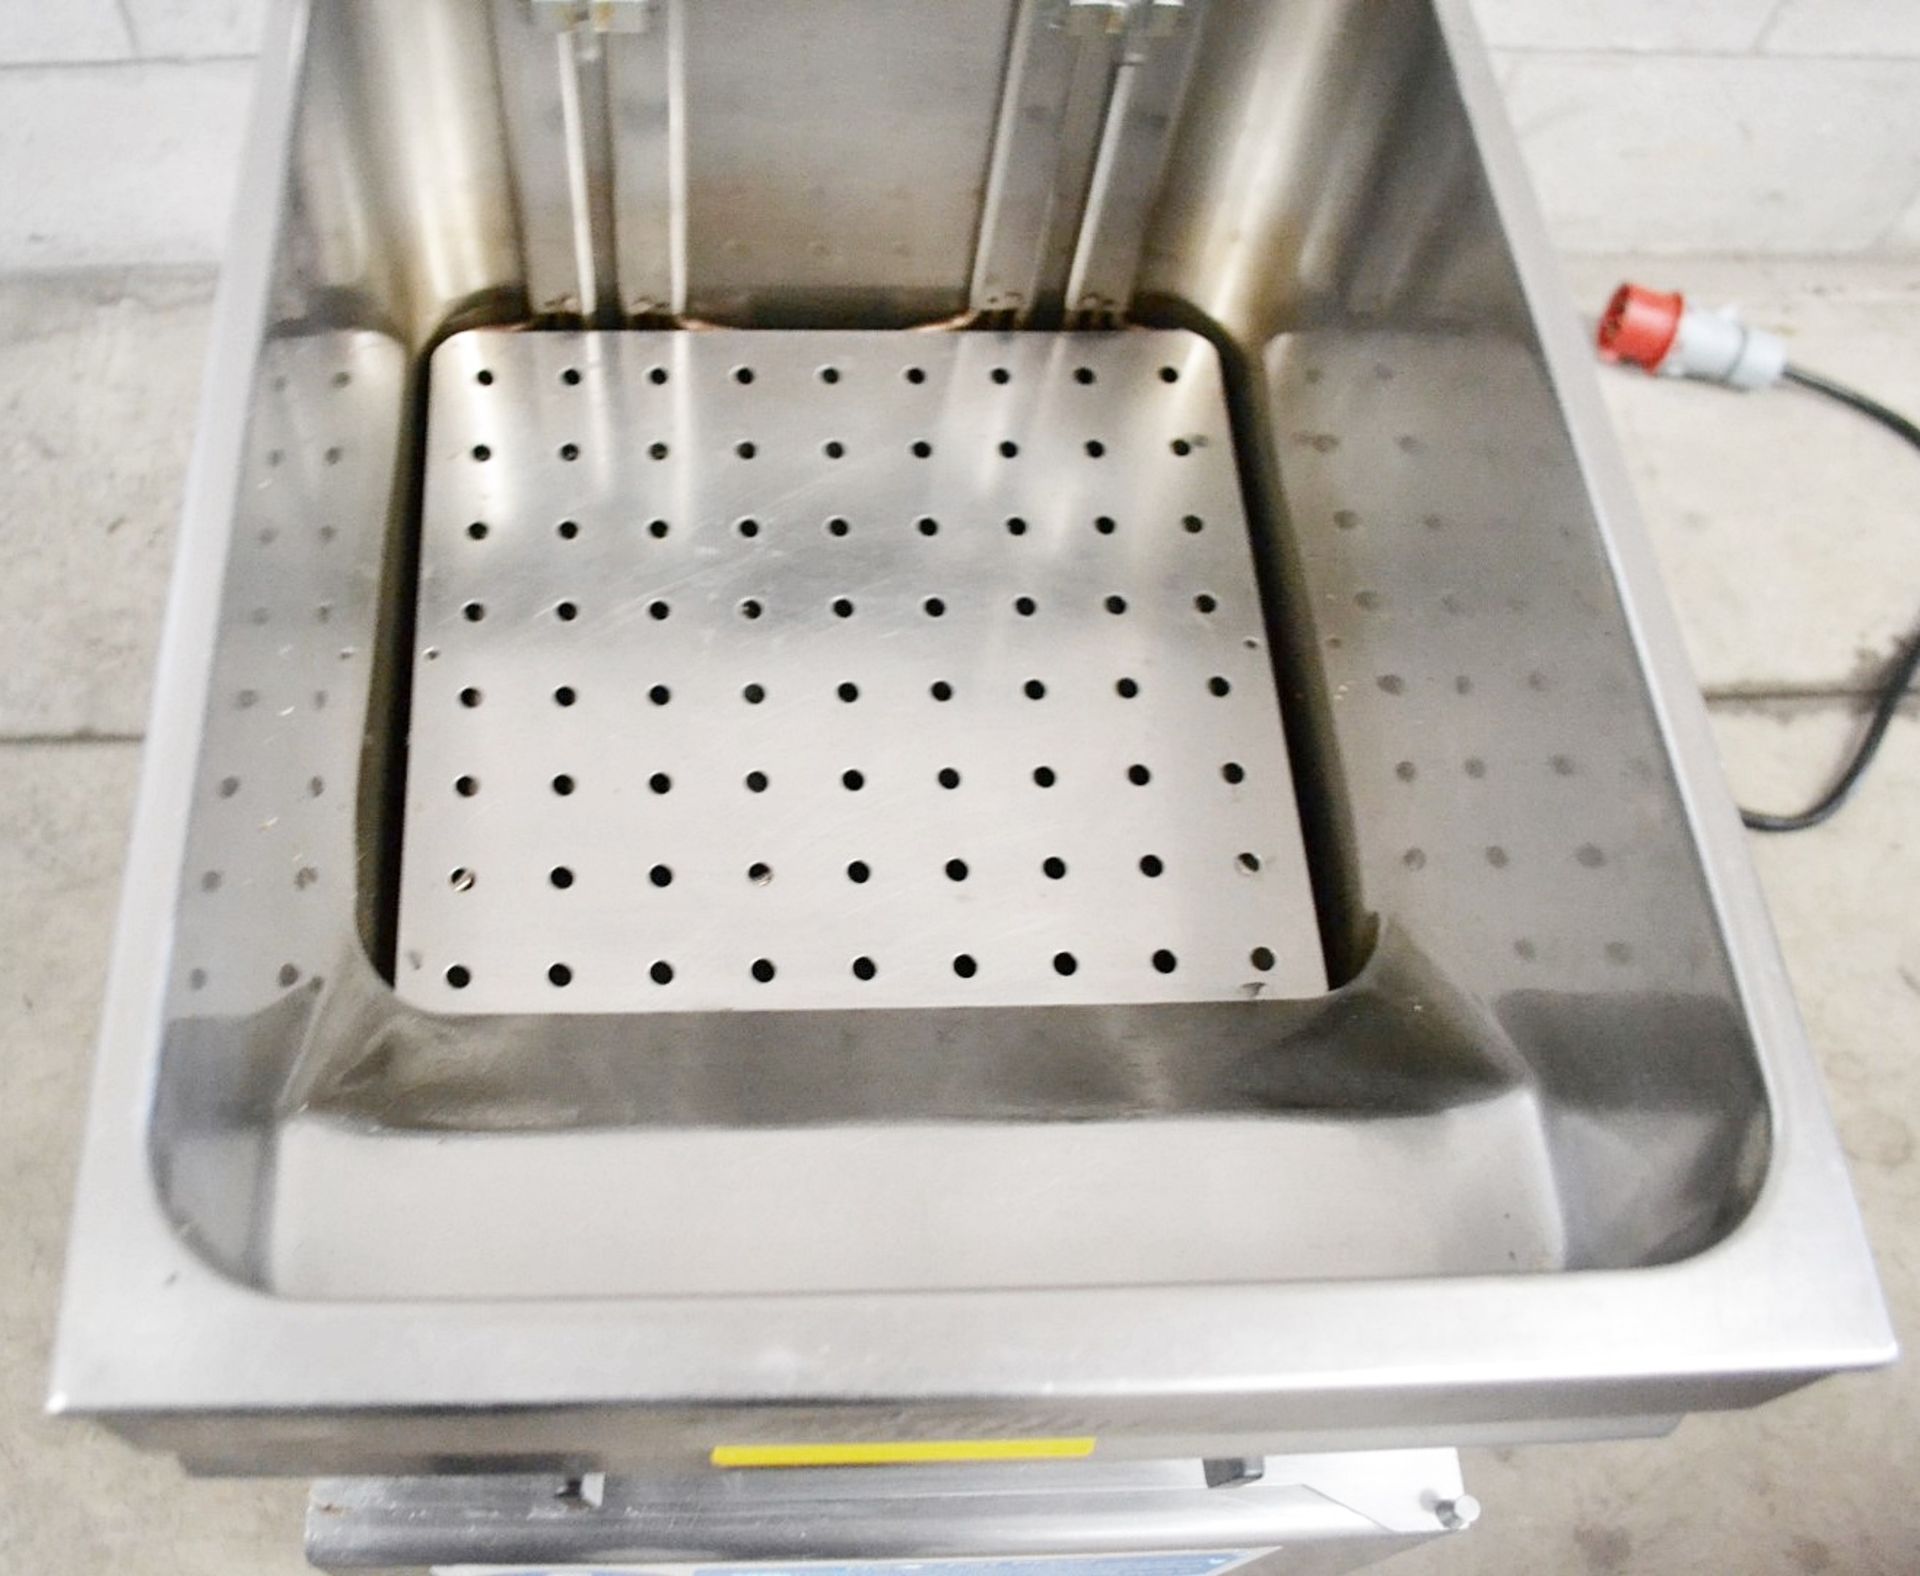 1 x Valentine Freestanding Twin Basket Fryer - Easy Clean Stainless Steel Finish - 15 Litre Capacity - Image 3 of 6